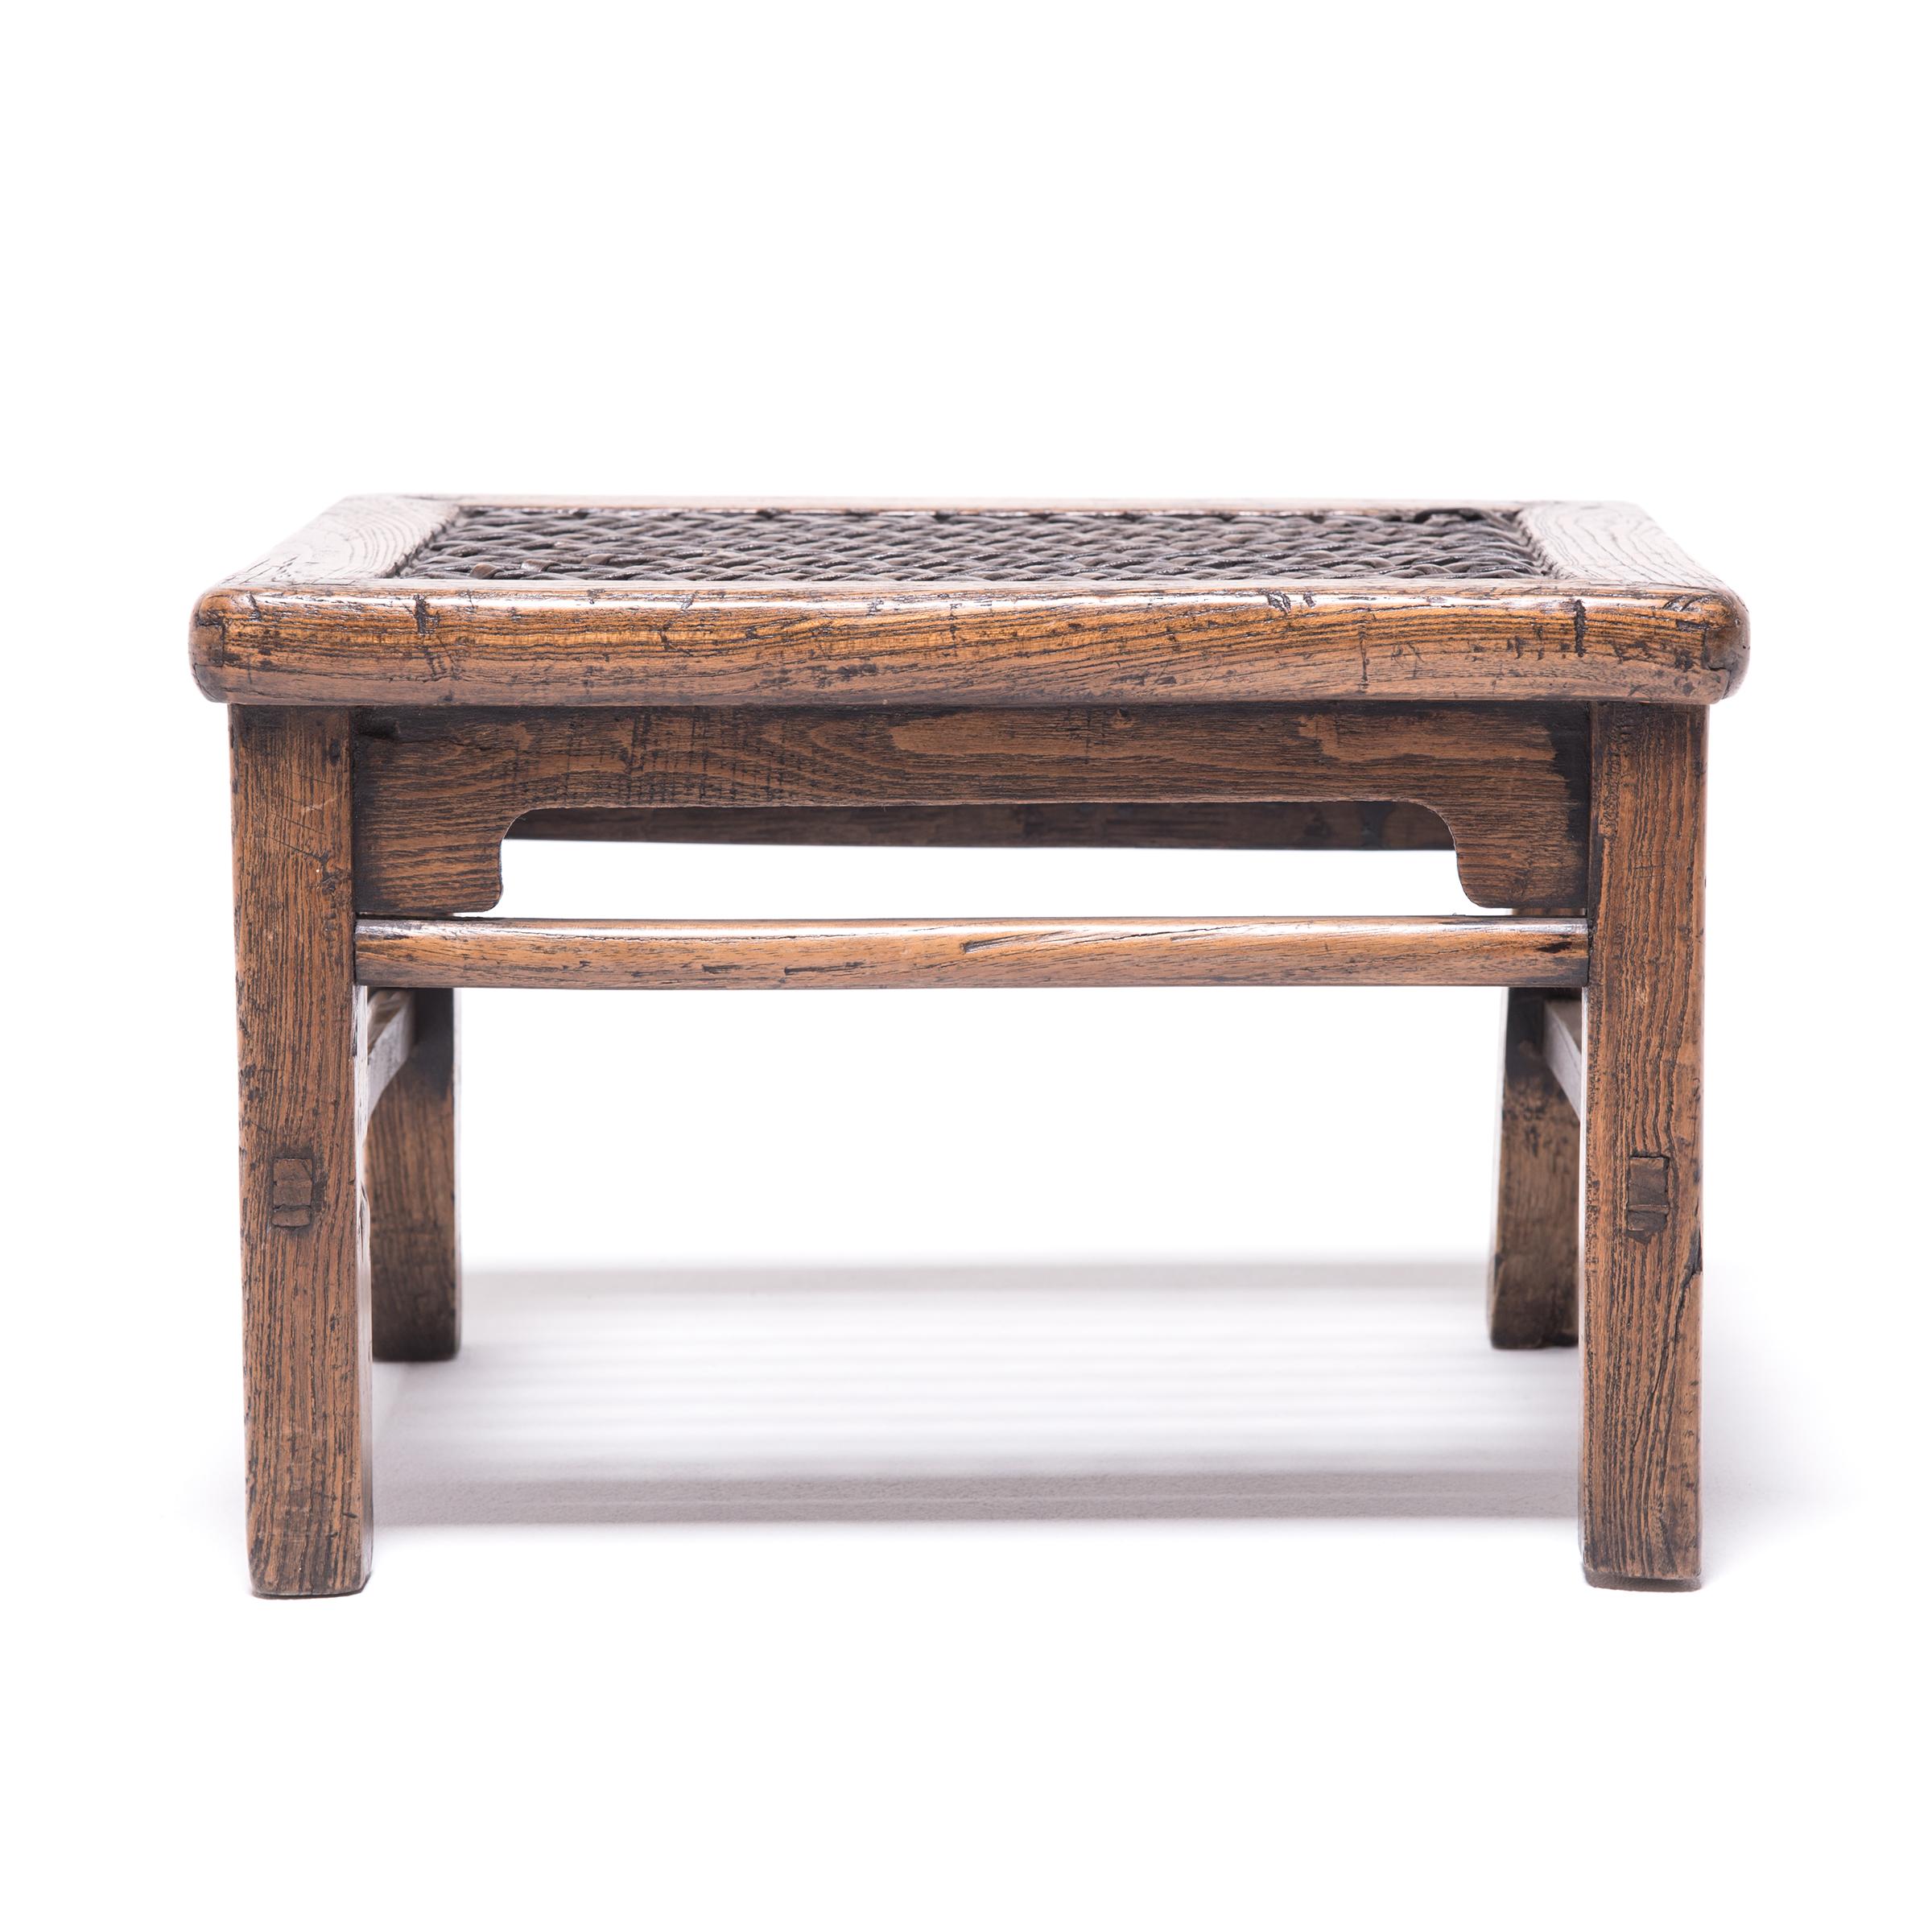 Qing Low Chinese Stool with Woven Hide Top, c. 1850 For Sale